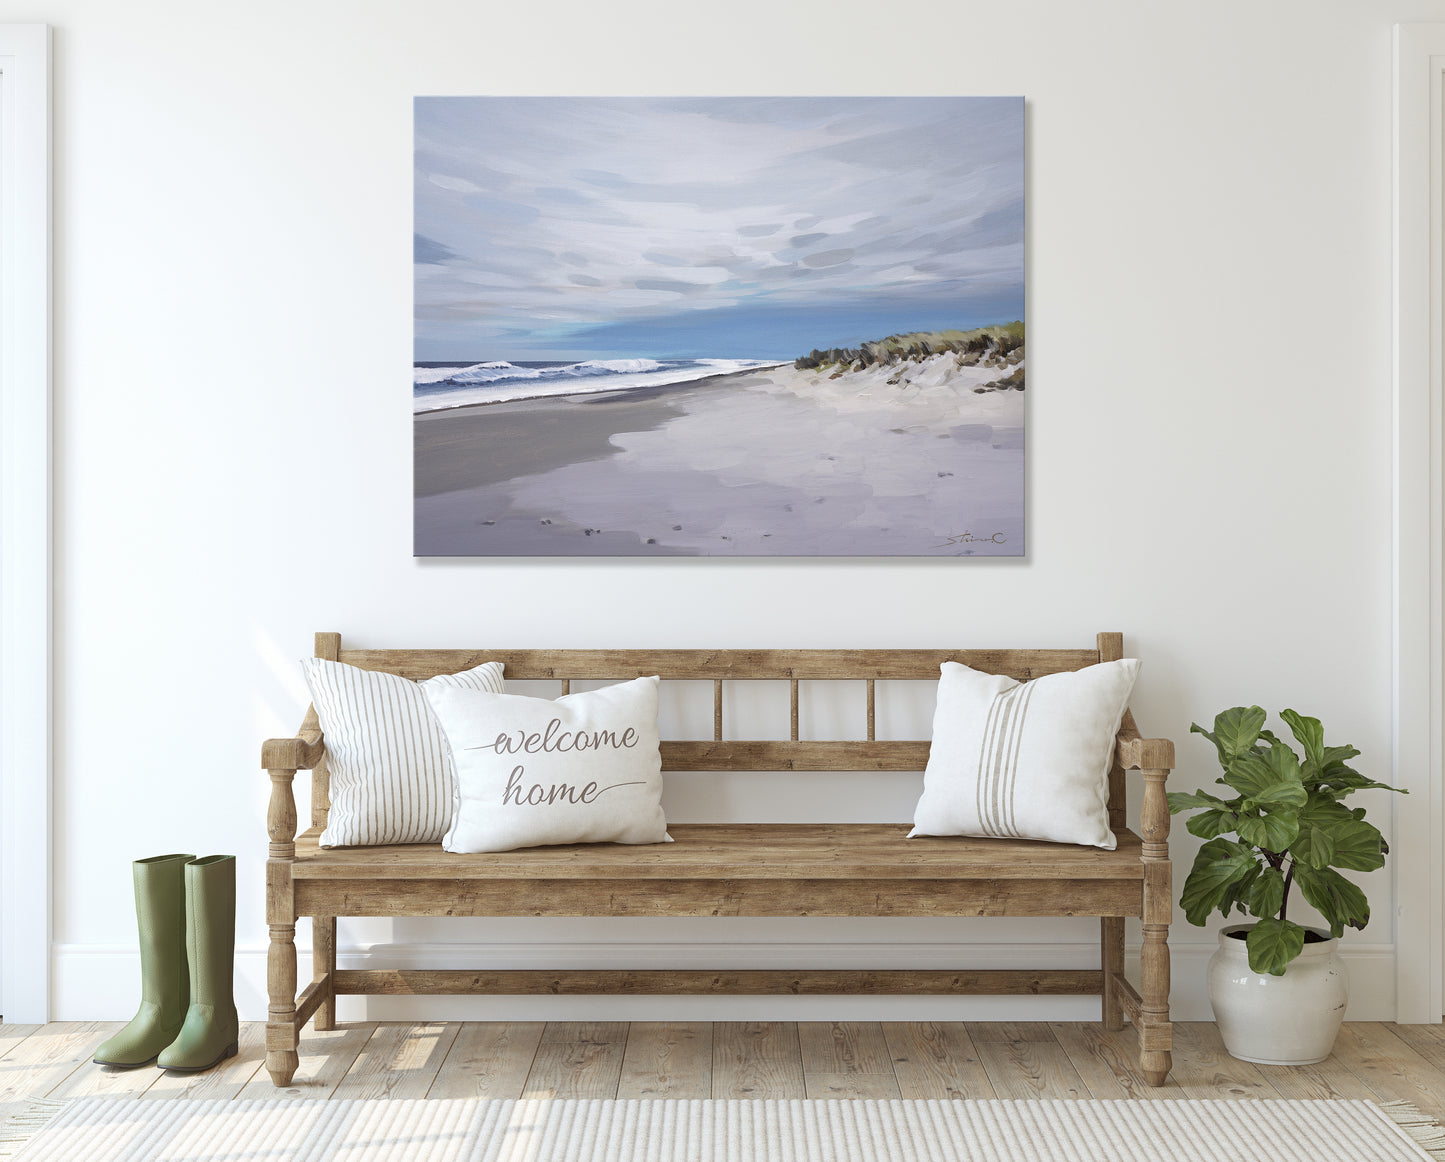 Salted Air and the Calming Waves *25% Off at checkout